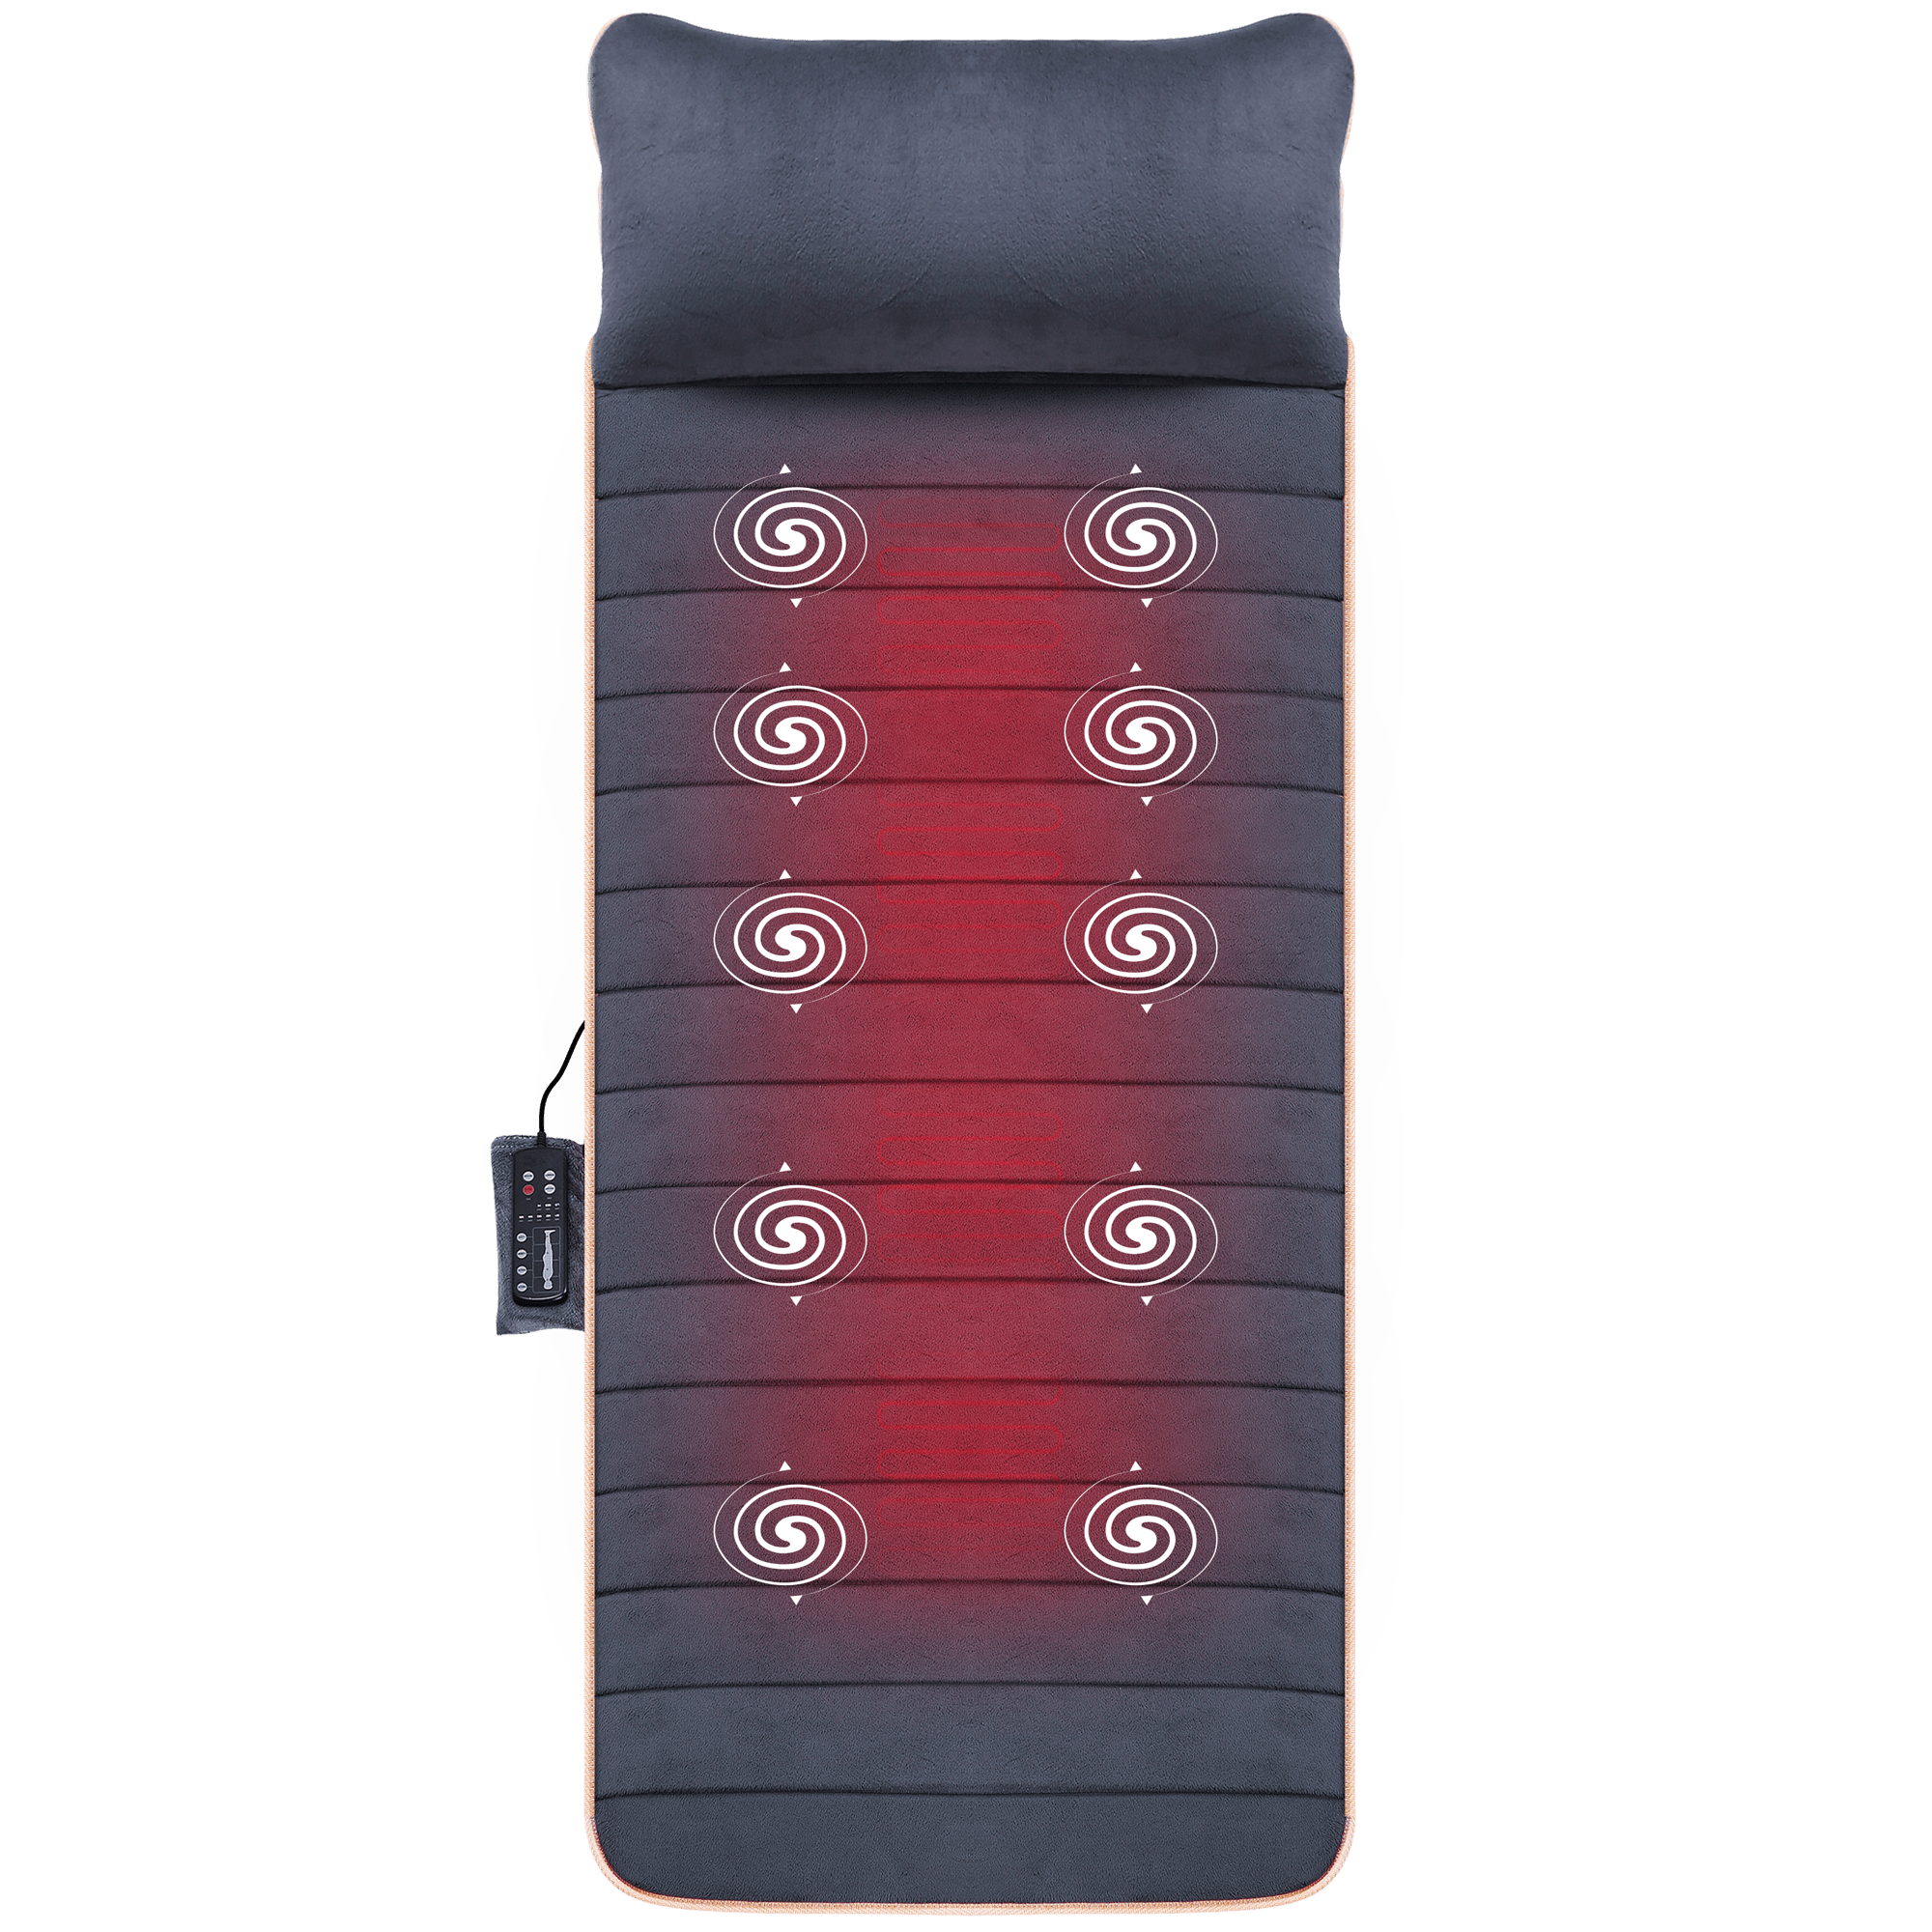 Massage Mat with 10 Vibrating Motors and 4 Therapy Heating pad -363